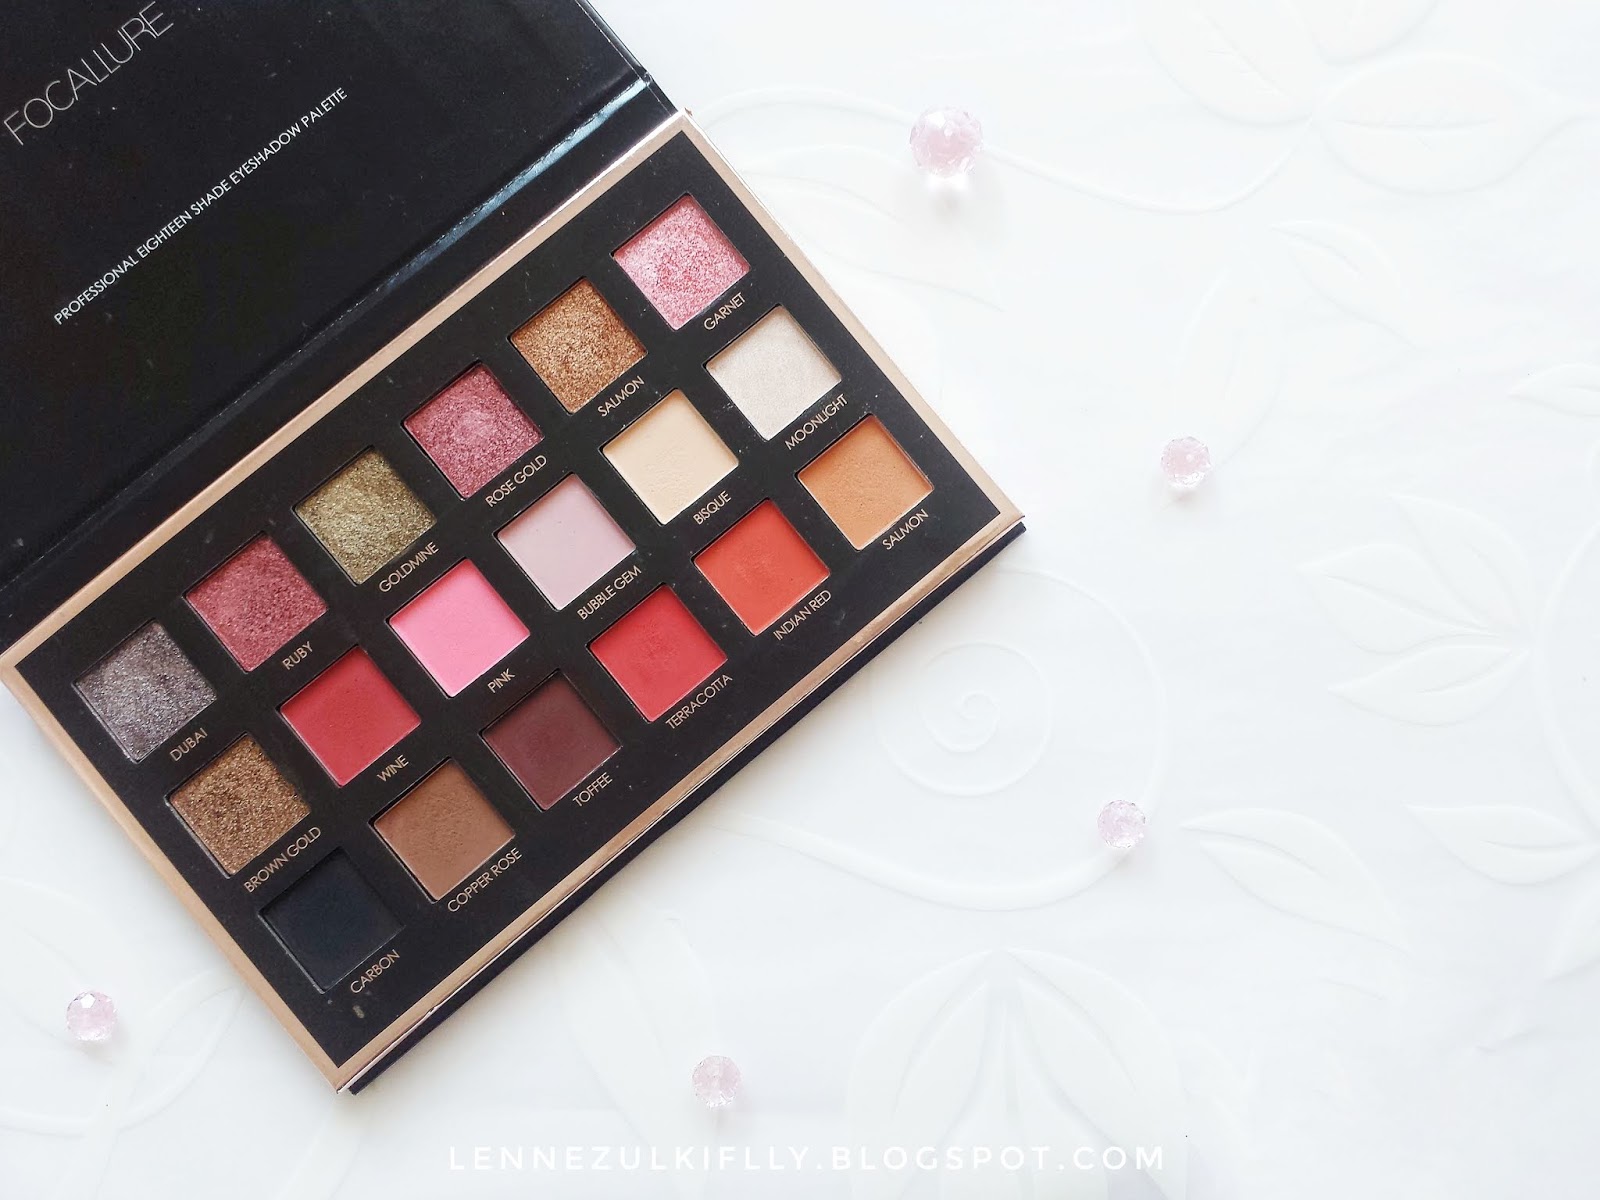 Focallure 18 Shades Full Function Palette in 01 Bright Lux | LENNE ZULKIFLLY